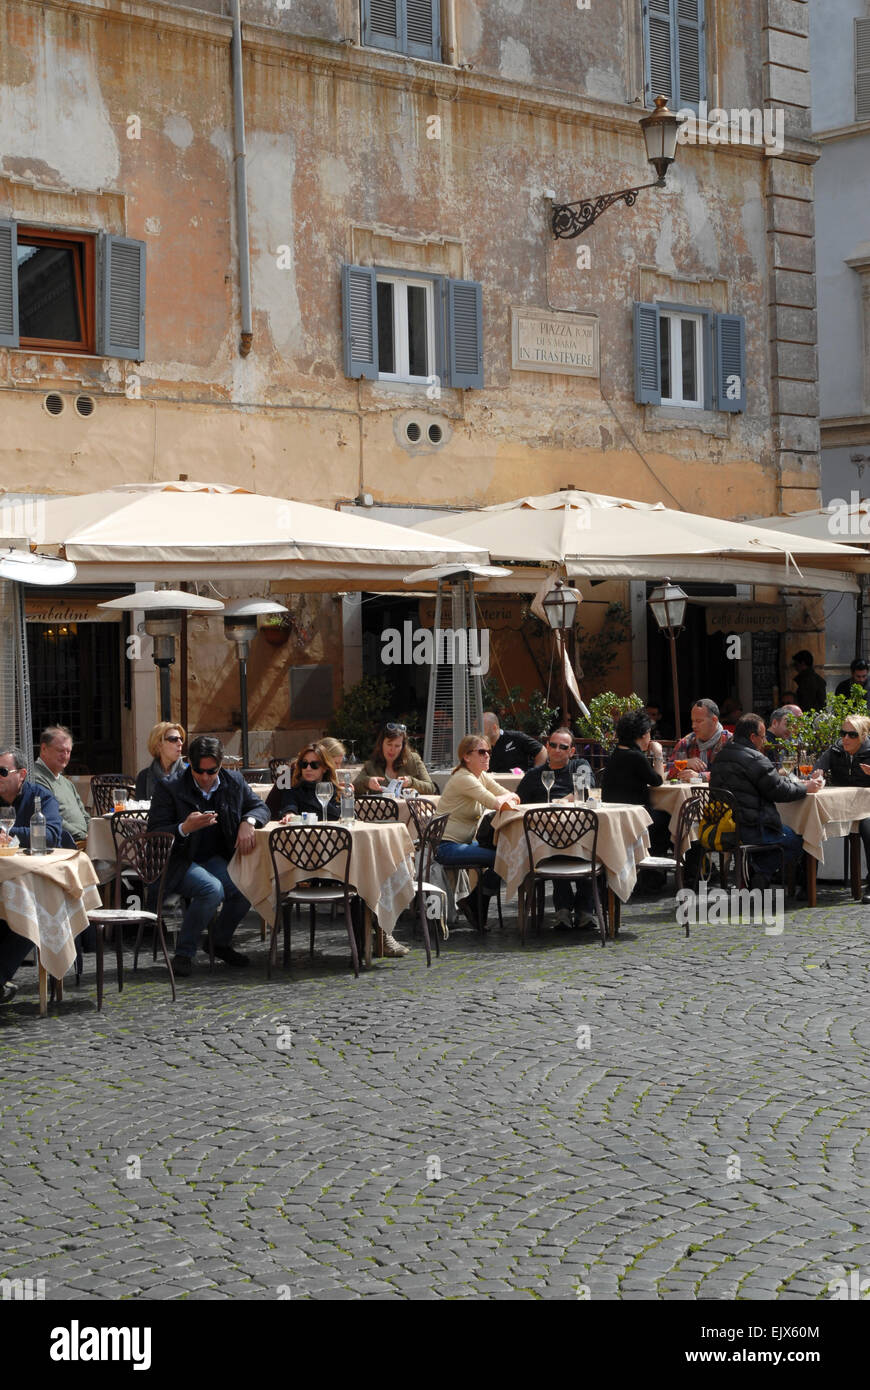 People eating out in the Piazza Santa Maria in Trastevere, Rome. Stock Photo